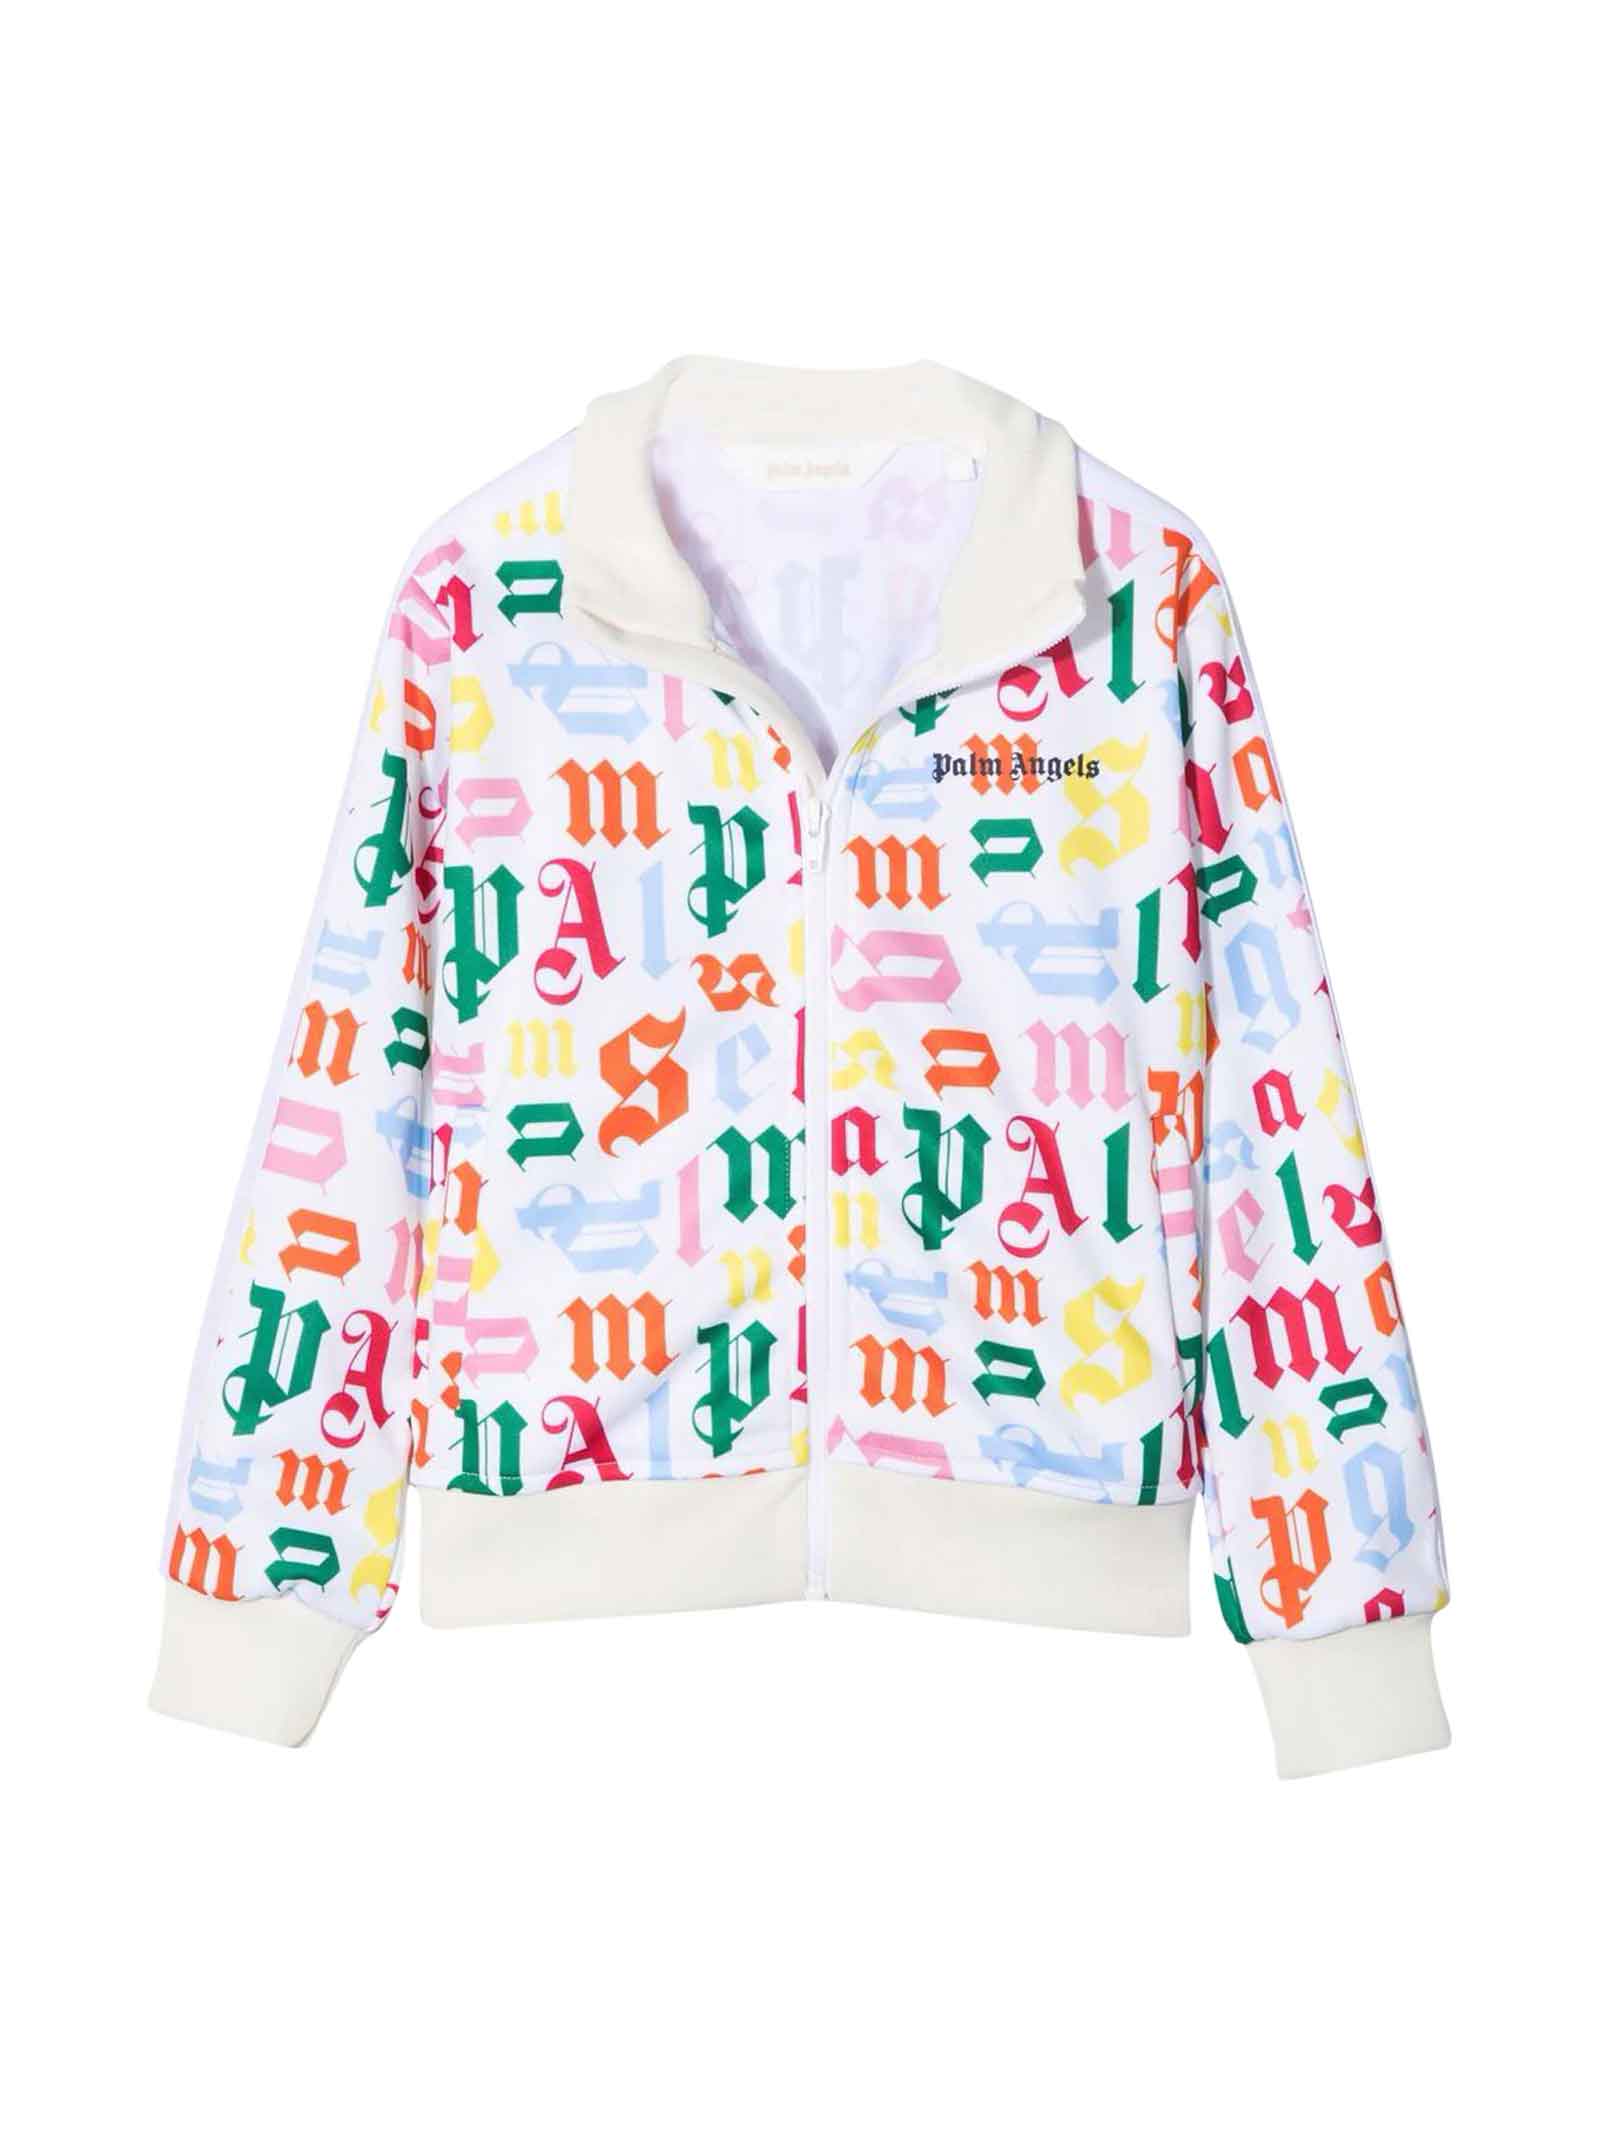 Palm Angels White Jacket With Multicolor Print